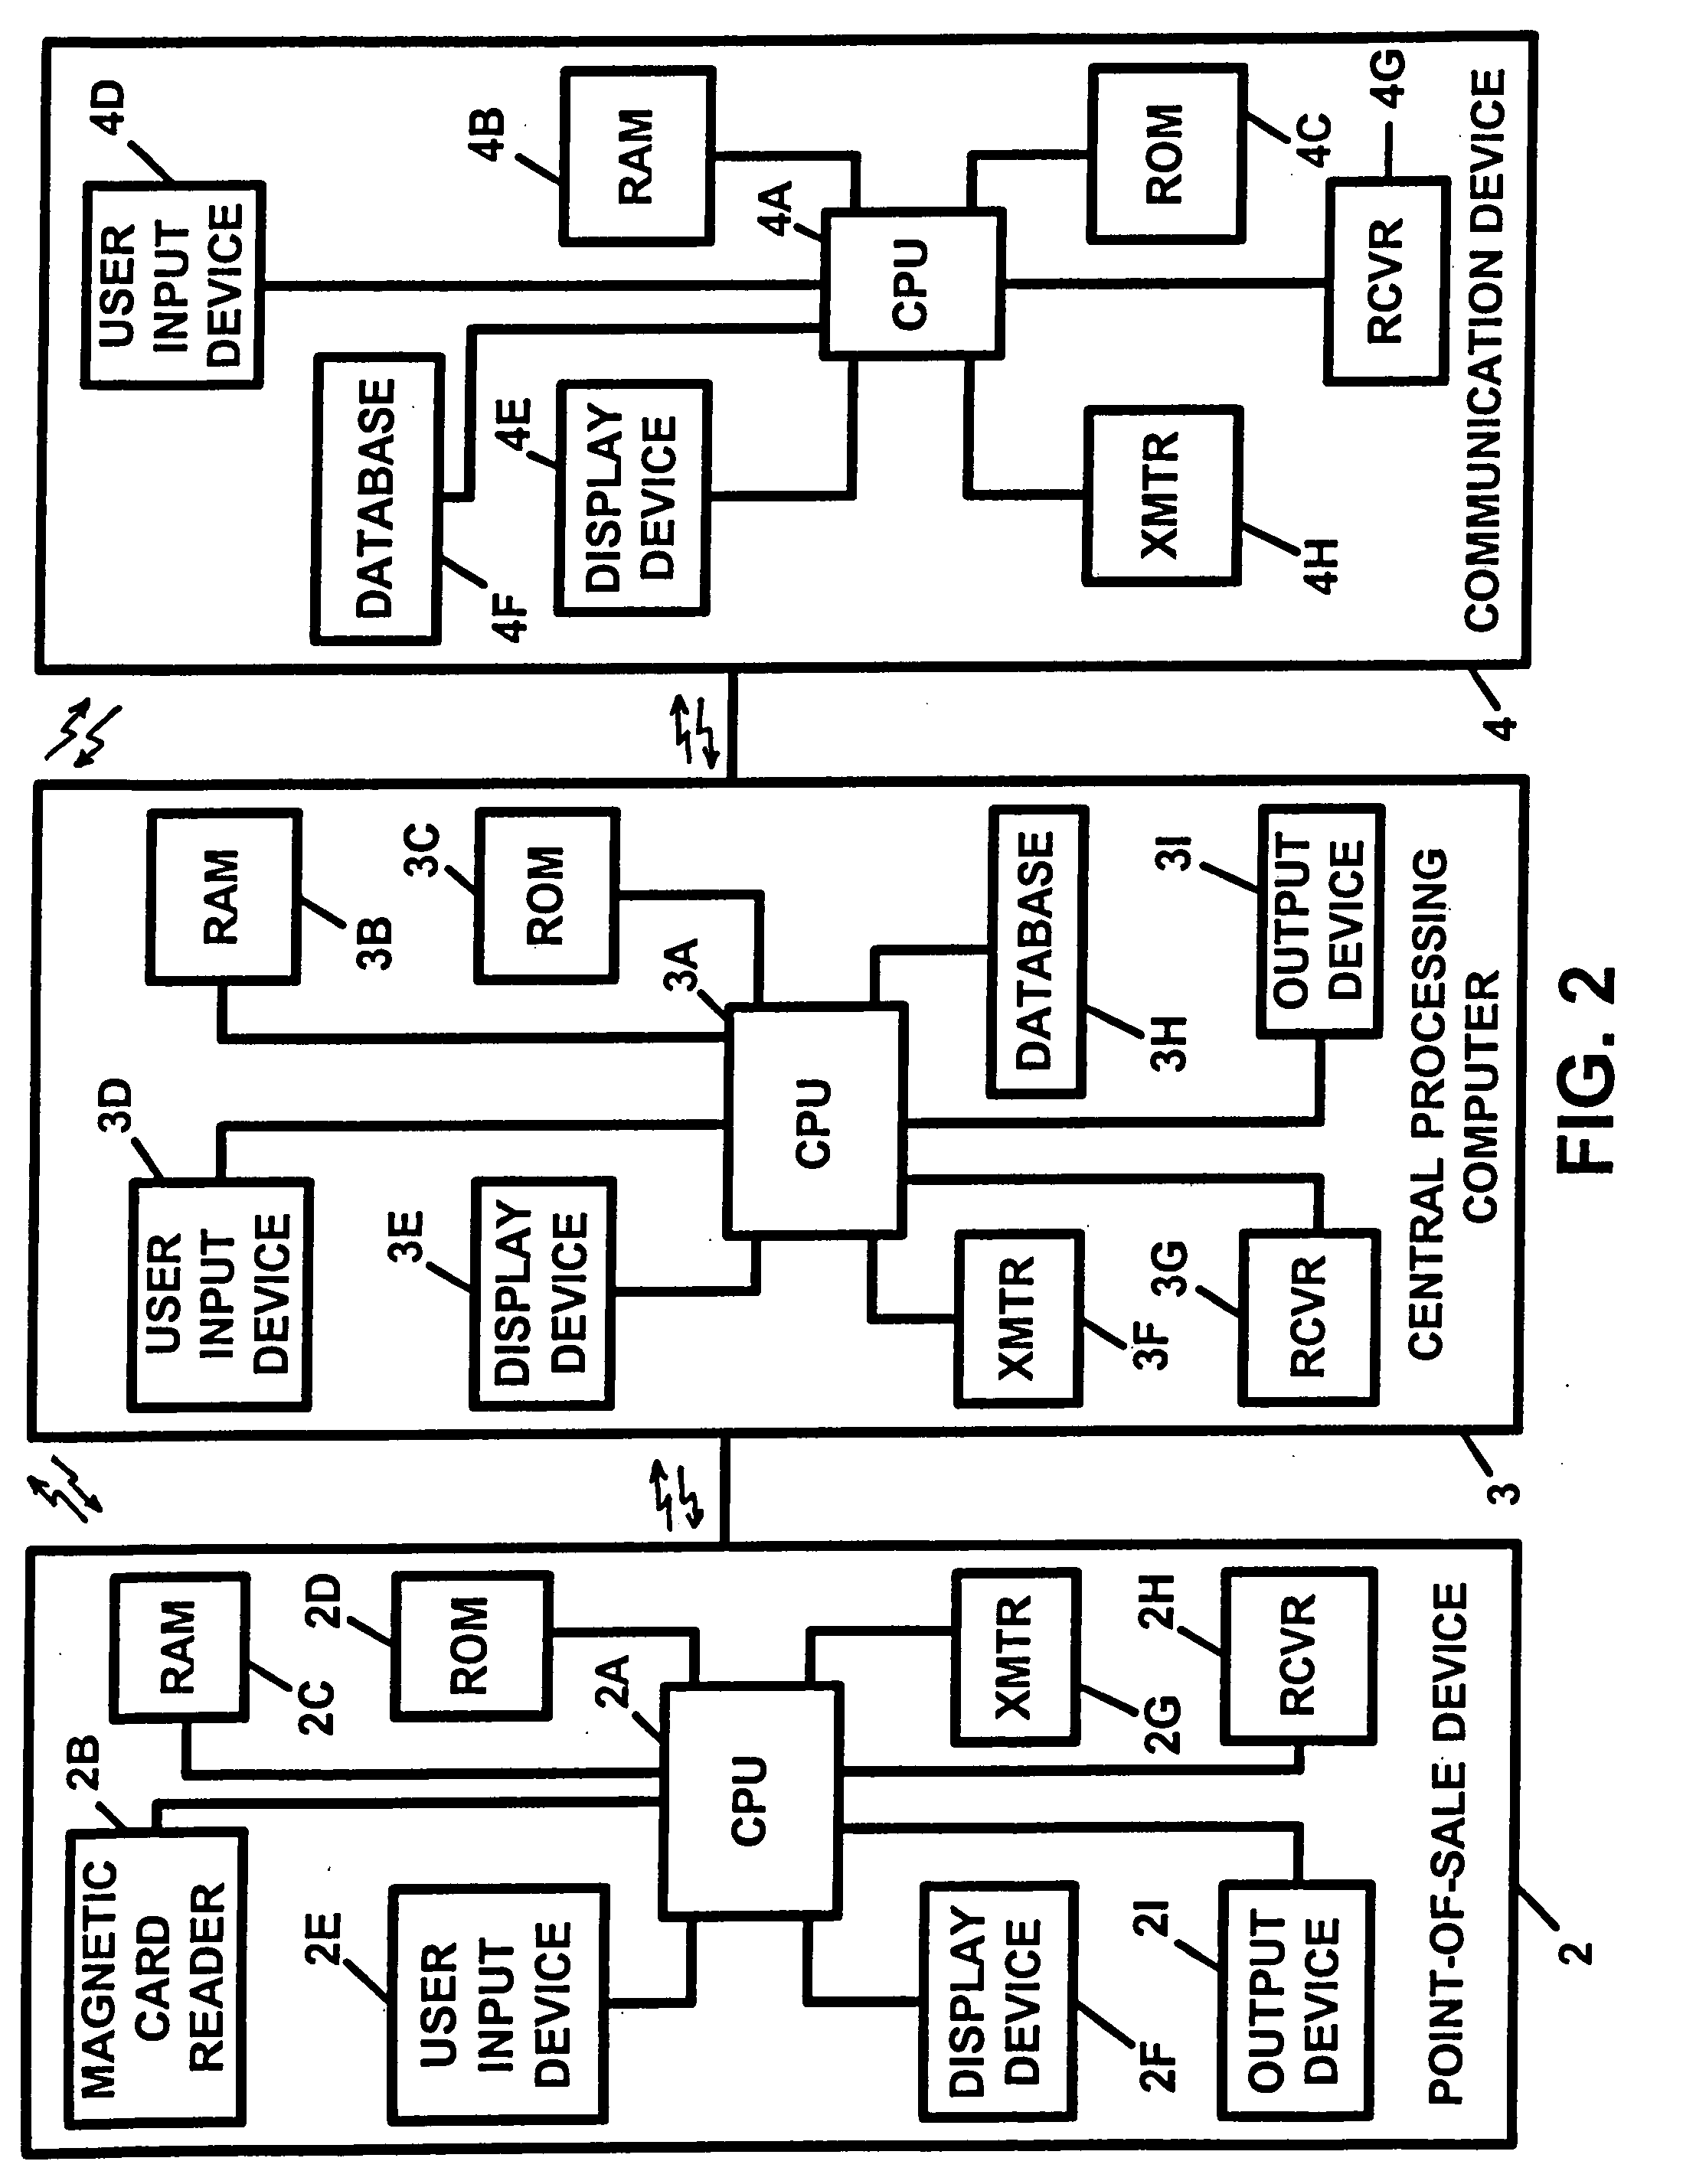 Apparatus and method for providing account security